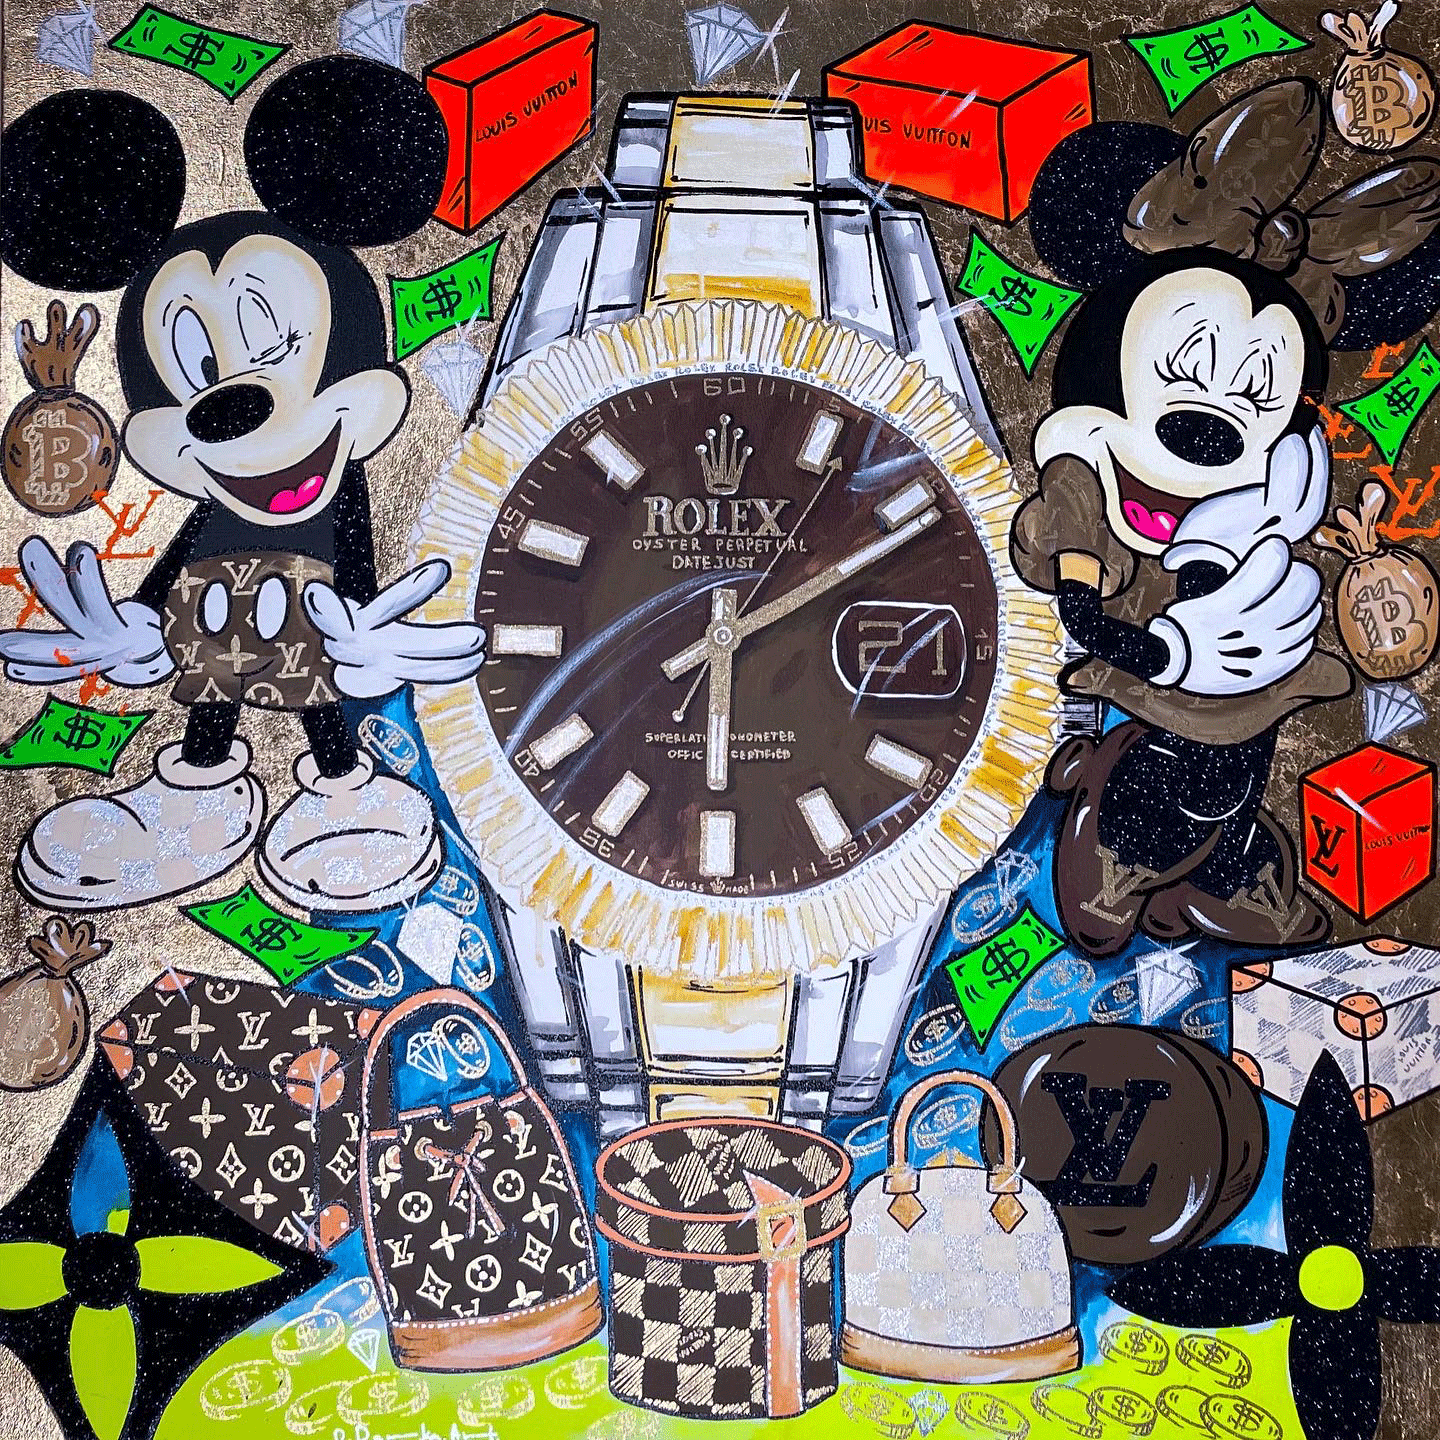 Daria Hil "Mickey and Minnie Mouse in love with Rolex"